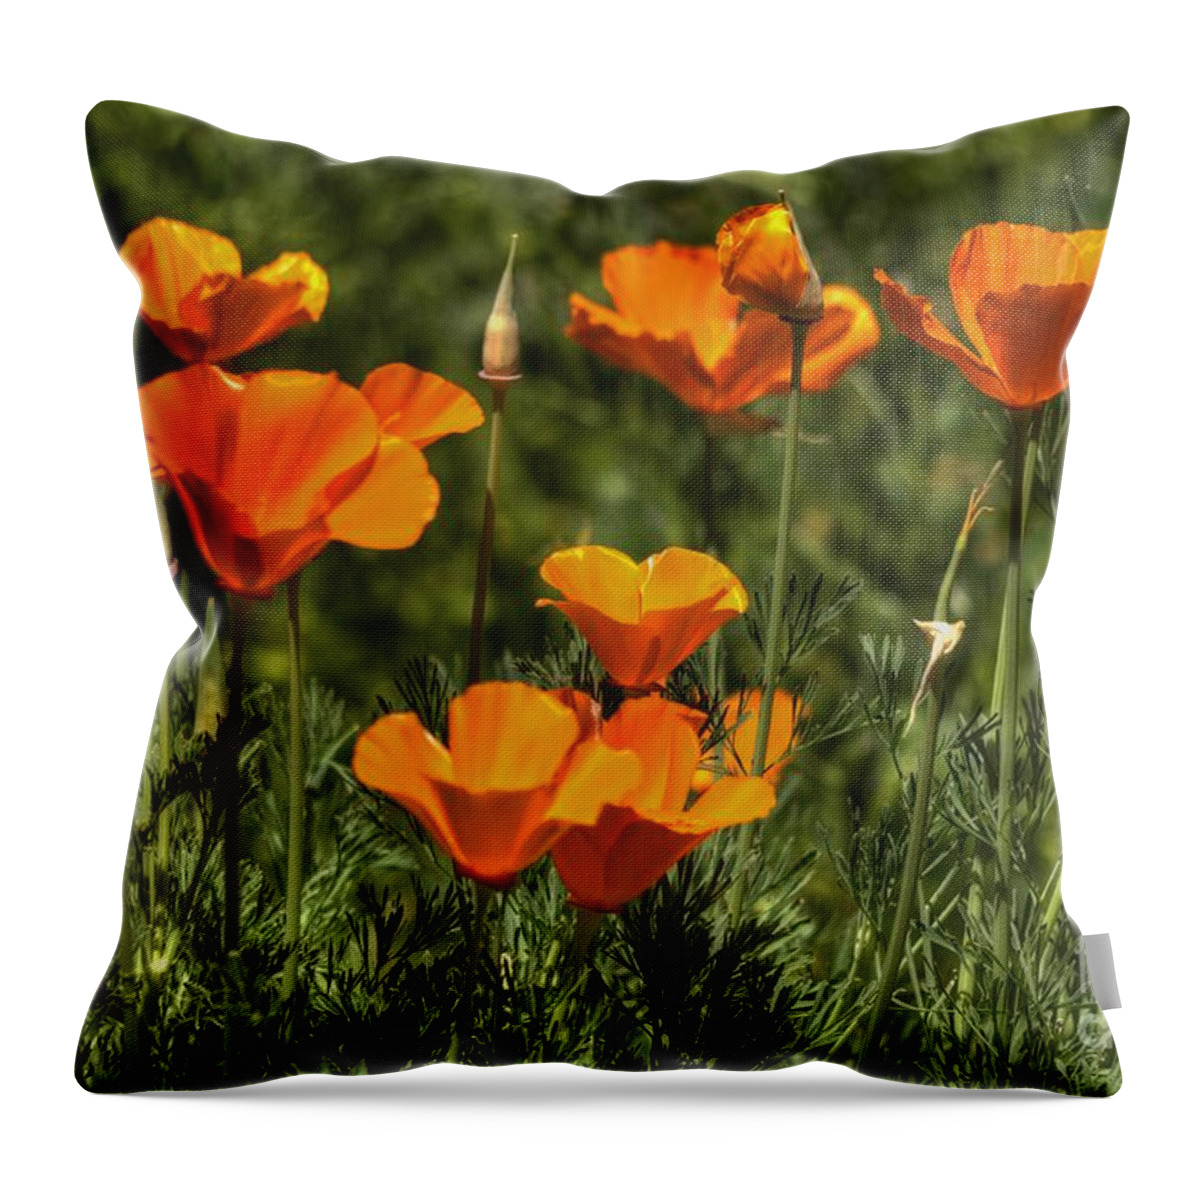 Poppies Throw Pillow featuring the photograph Poppies #9 by Marc Bittan